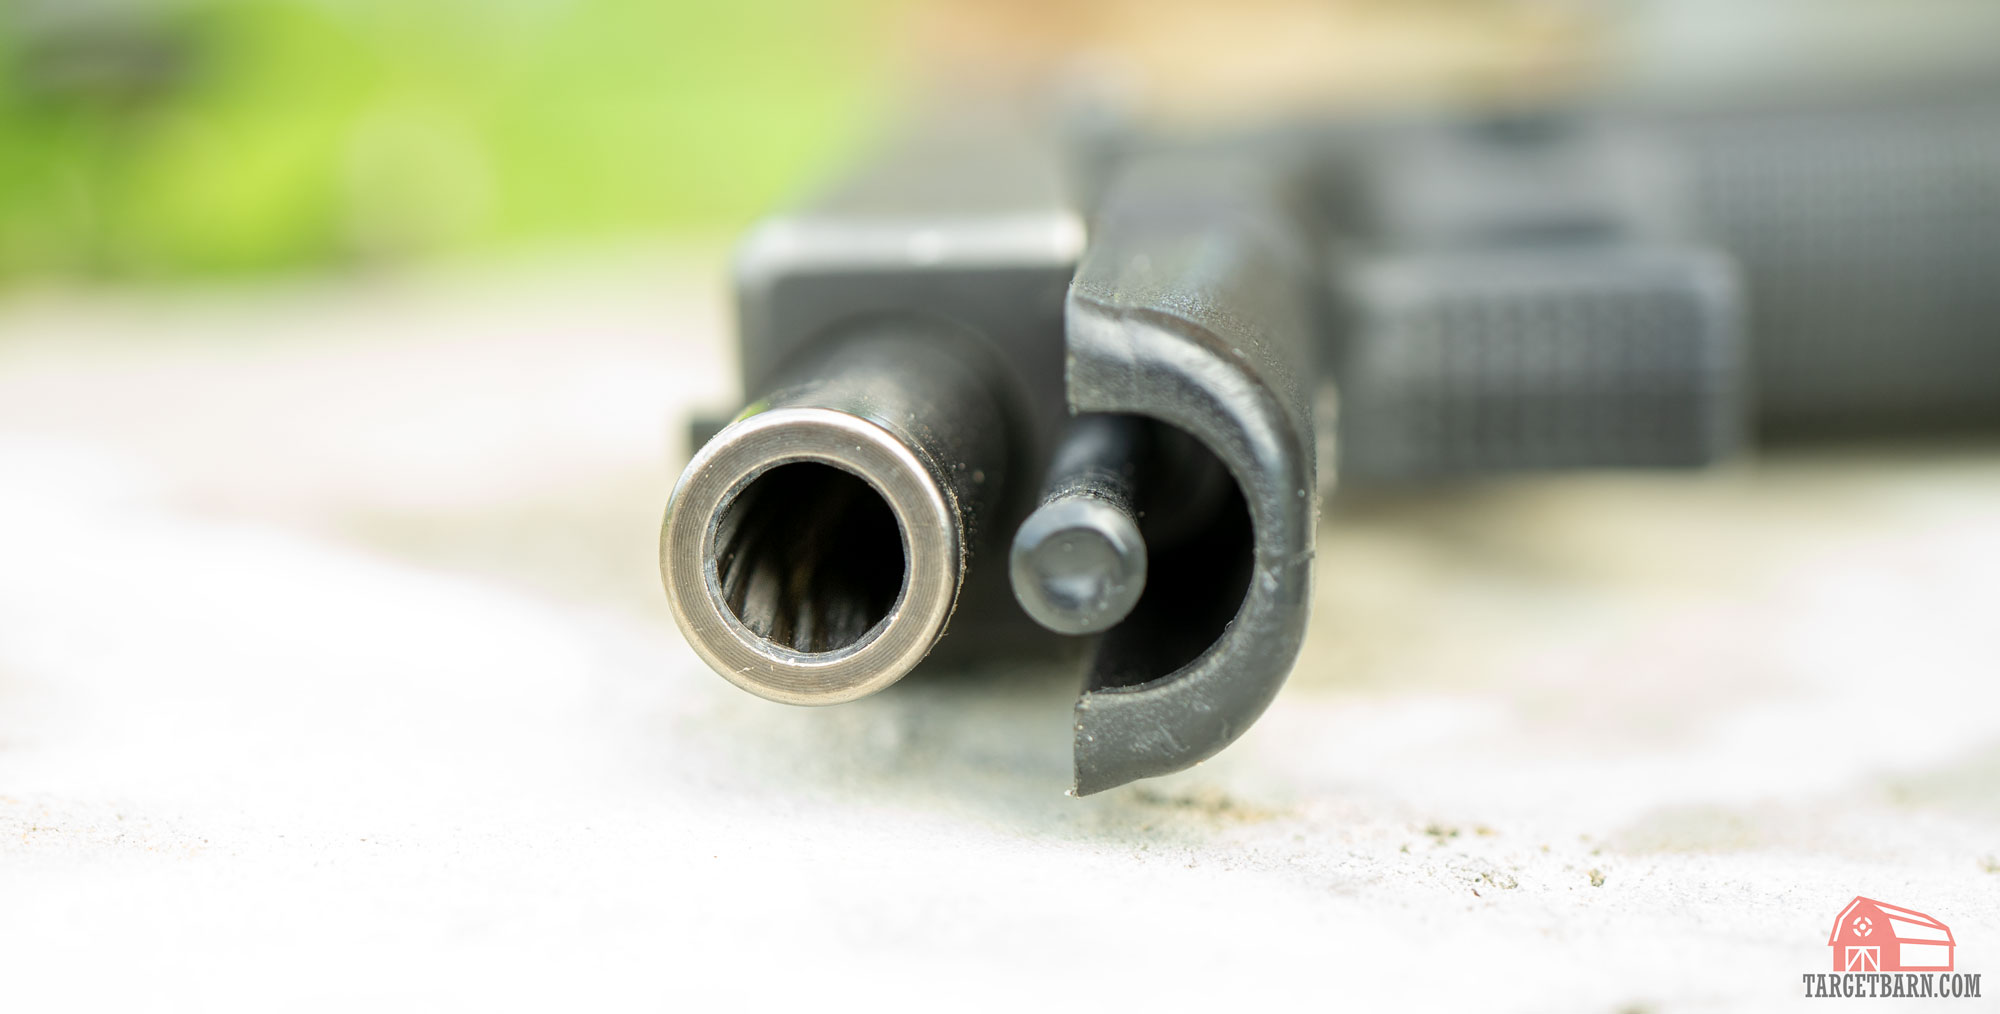 looking into the barrel of a glock with polygonal rifling